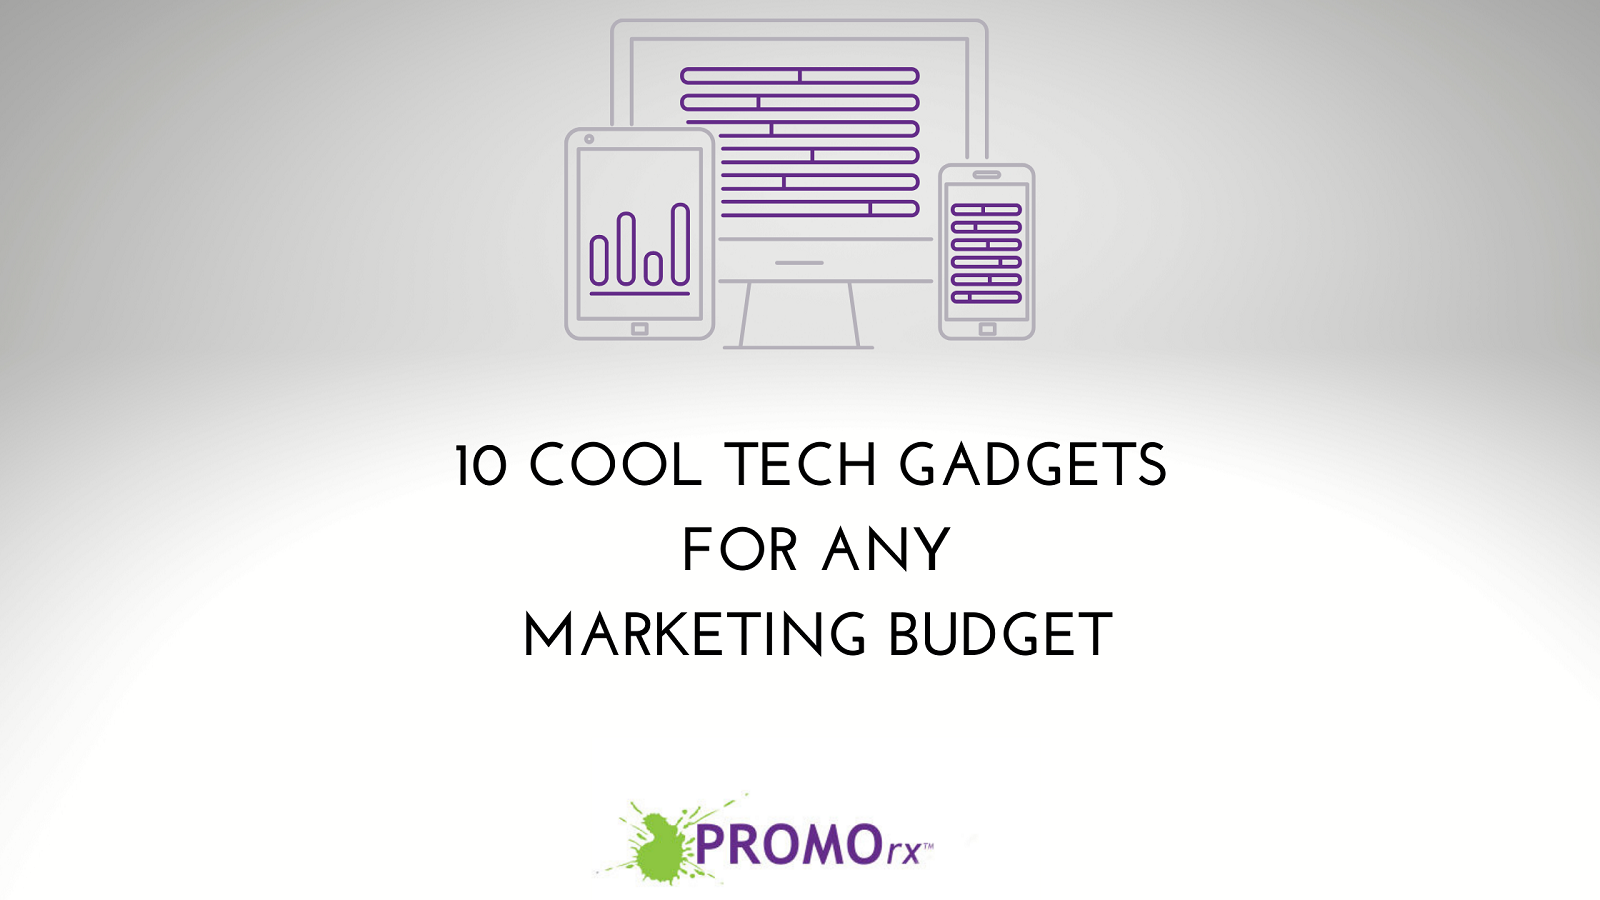 10 Cool Tech Gadgets for Any Marketing Budget